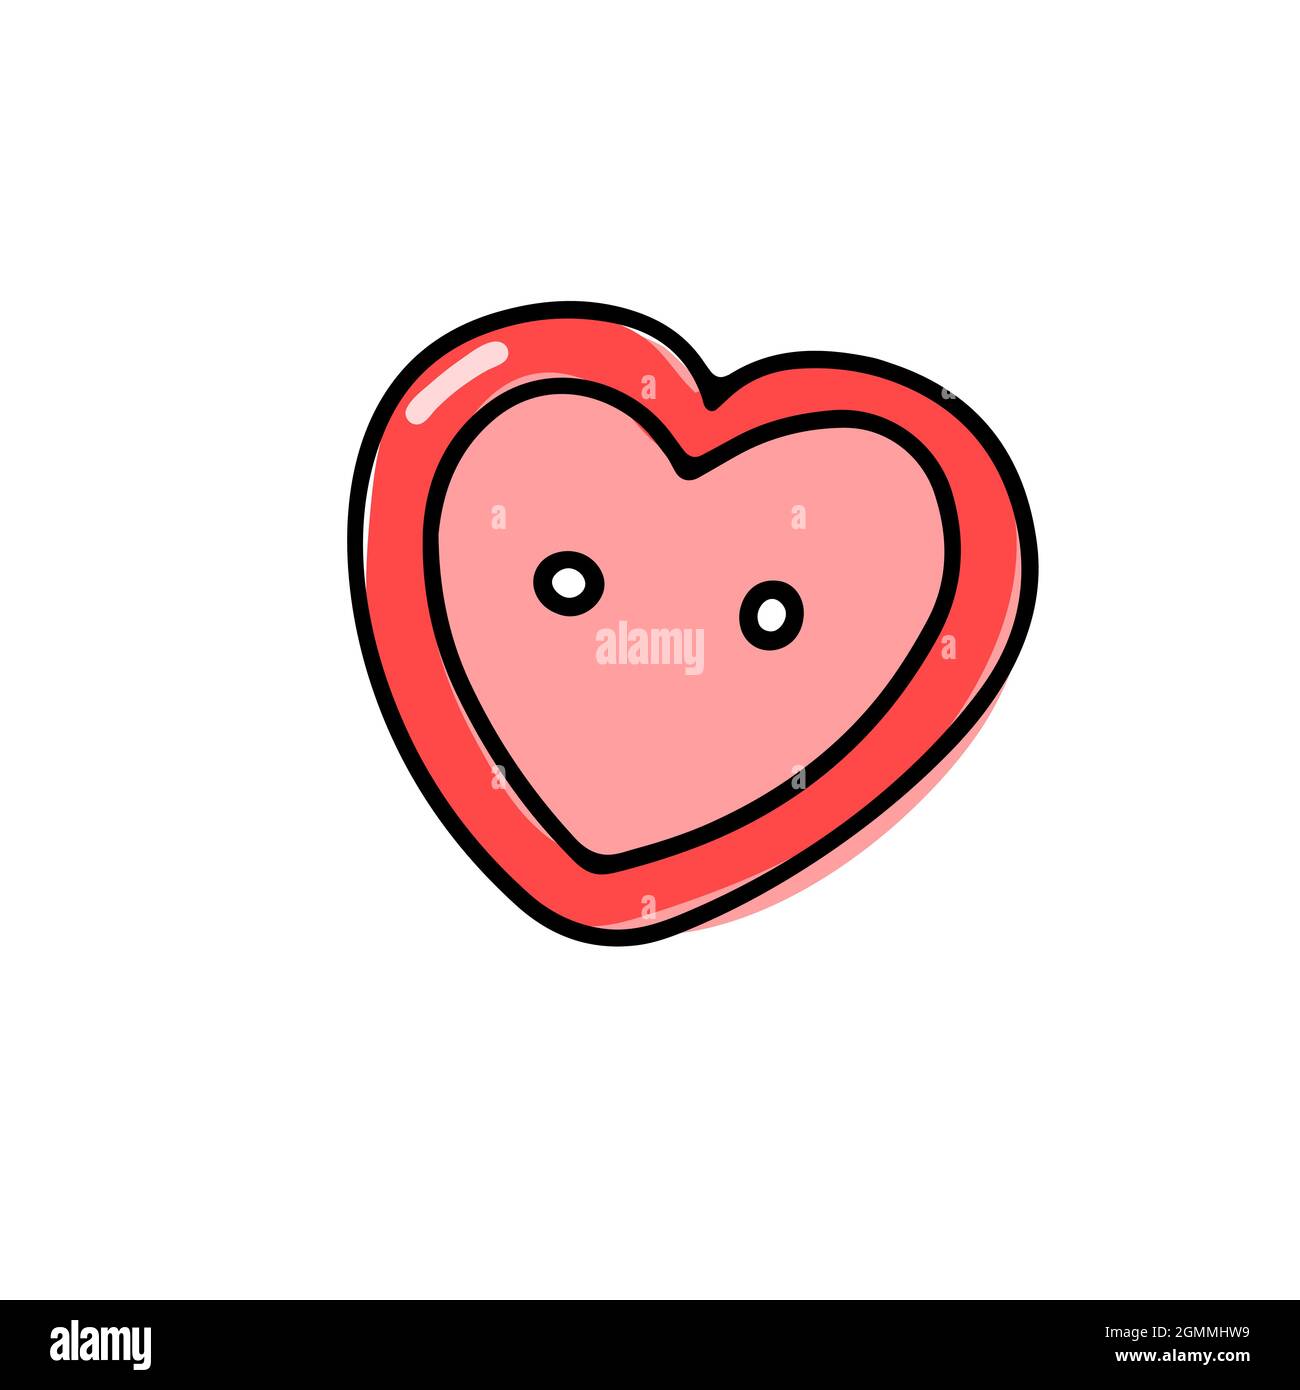 Vector heart-shaped red button isolated on white background. Doodle illustration for weddings, t-shirt, Valentines Day. Sketch Sign of love, romance, Stock Vector